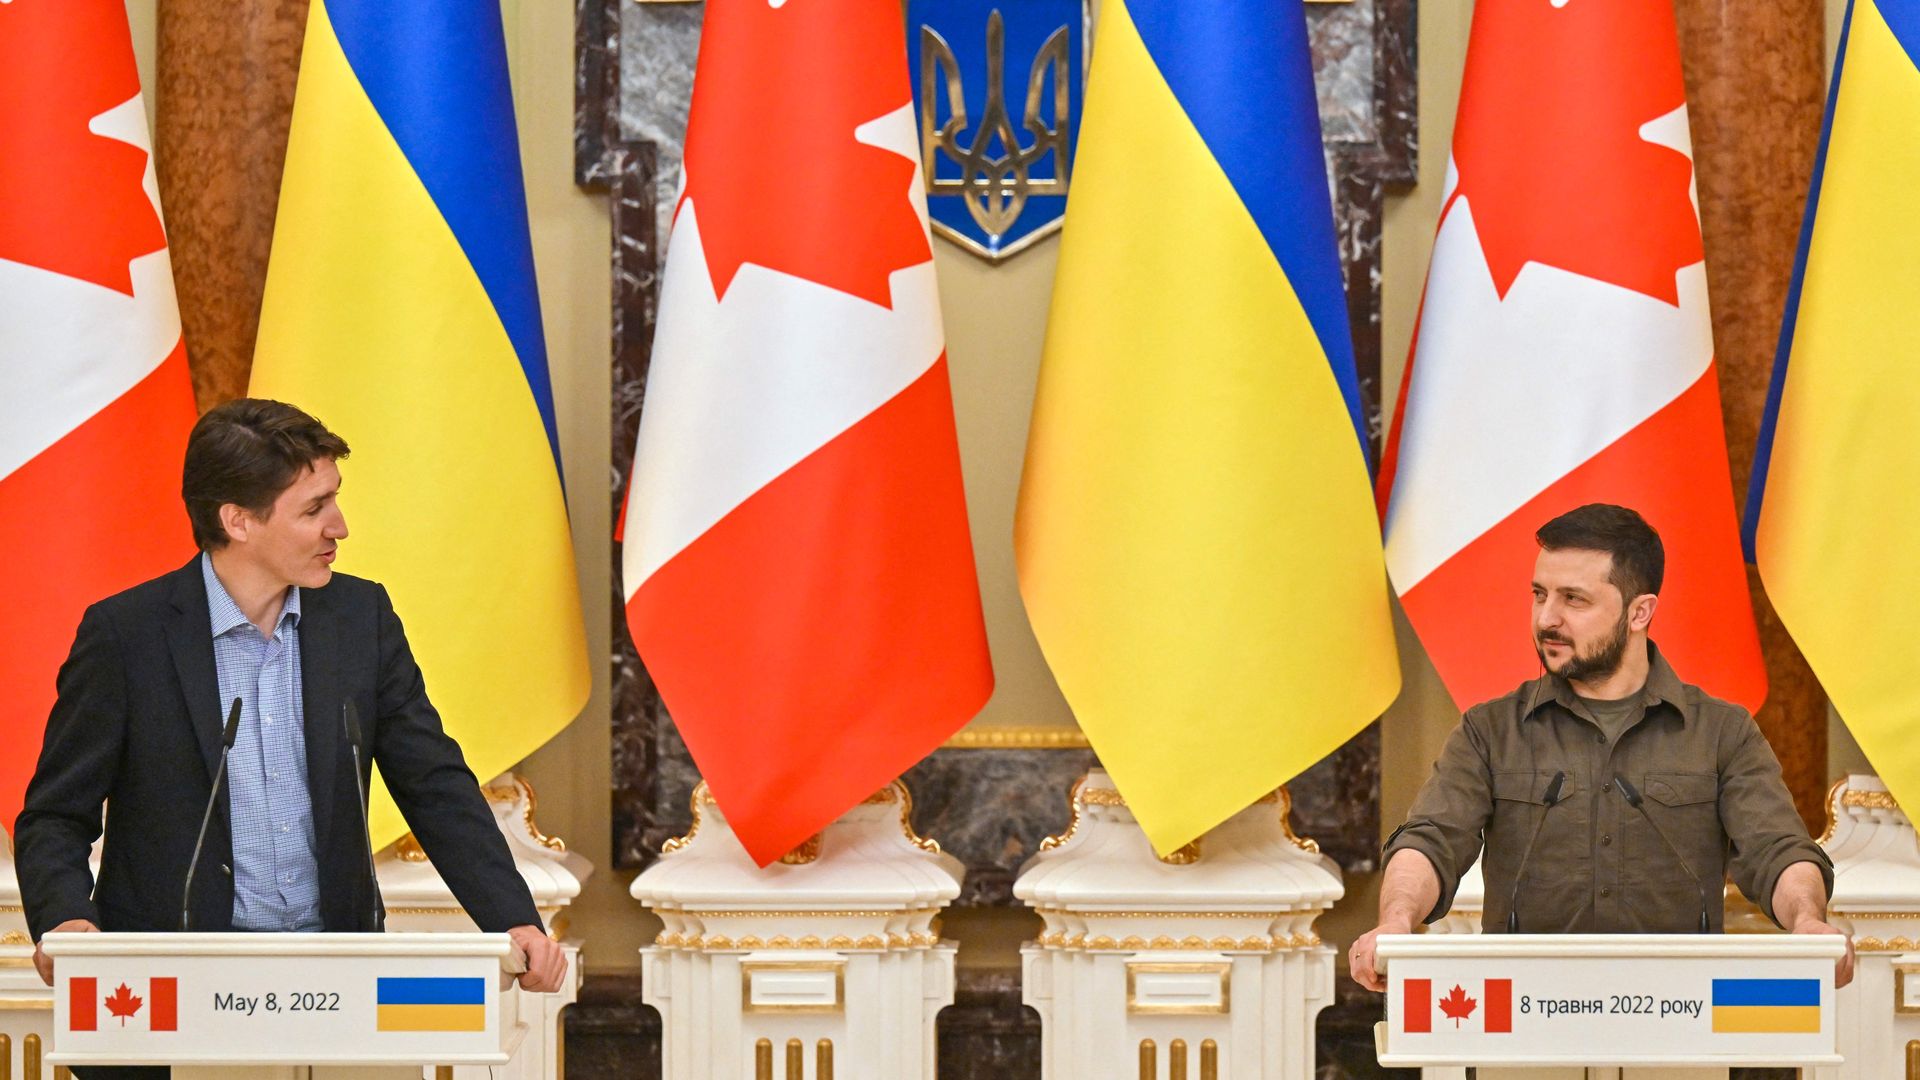 Canada Prime Minister Justin Trudeau is seen meeting with Ukraine President Volodymyr Zelensky in Kyiv.